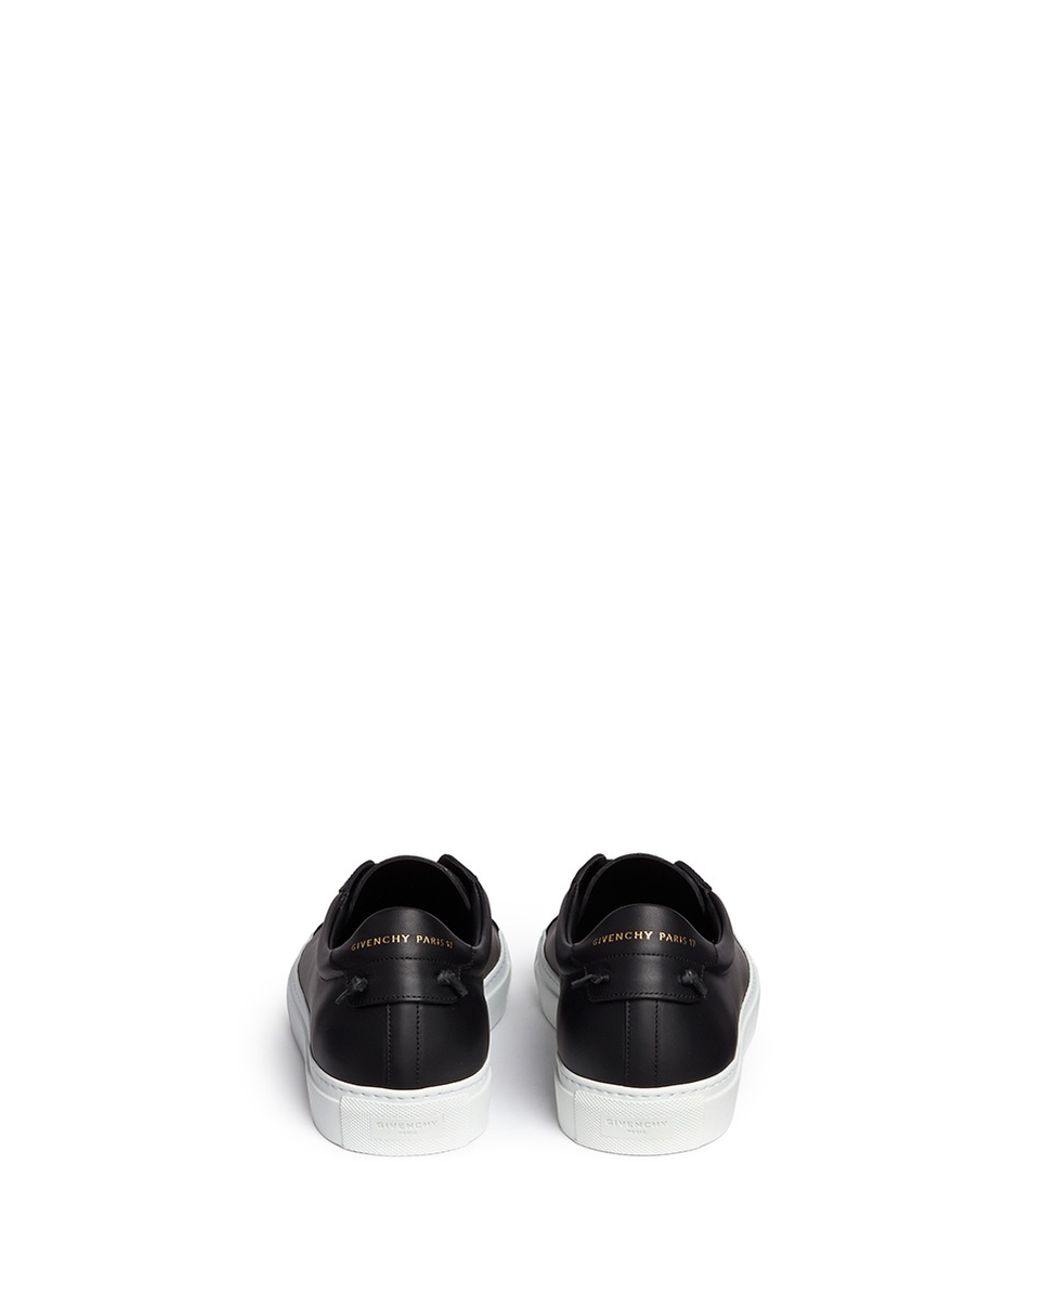 Givenchy 'paris 17' Leather Low Top Sneakers in Black for Men | Lyst